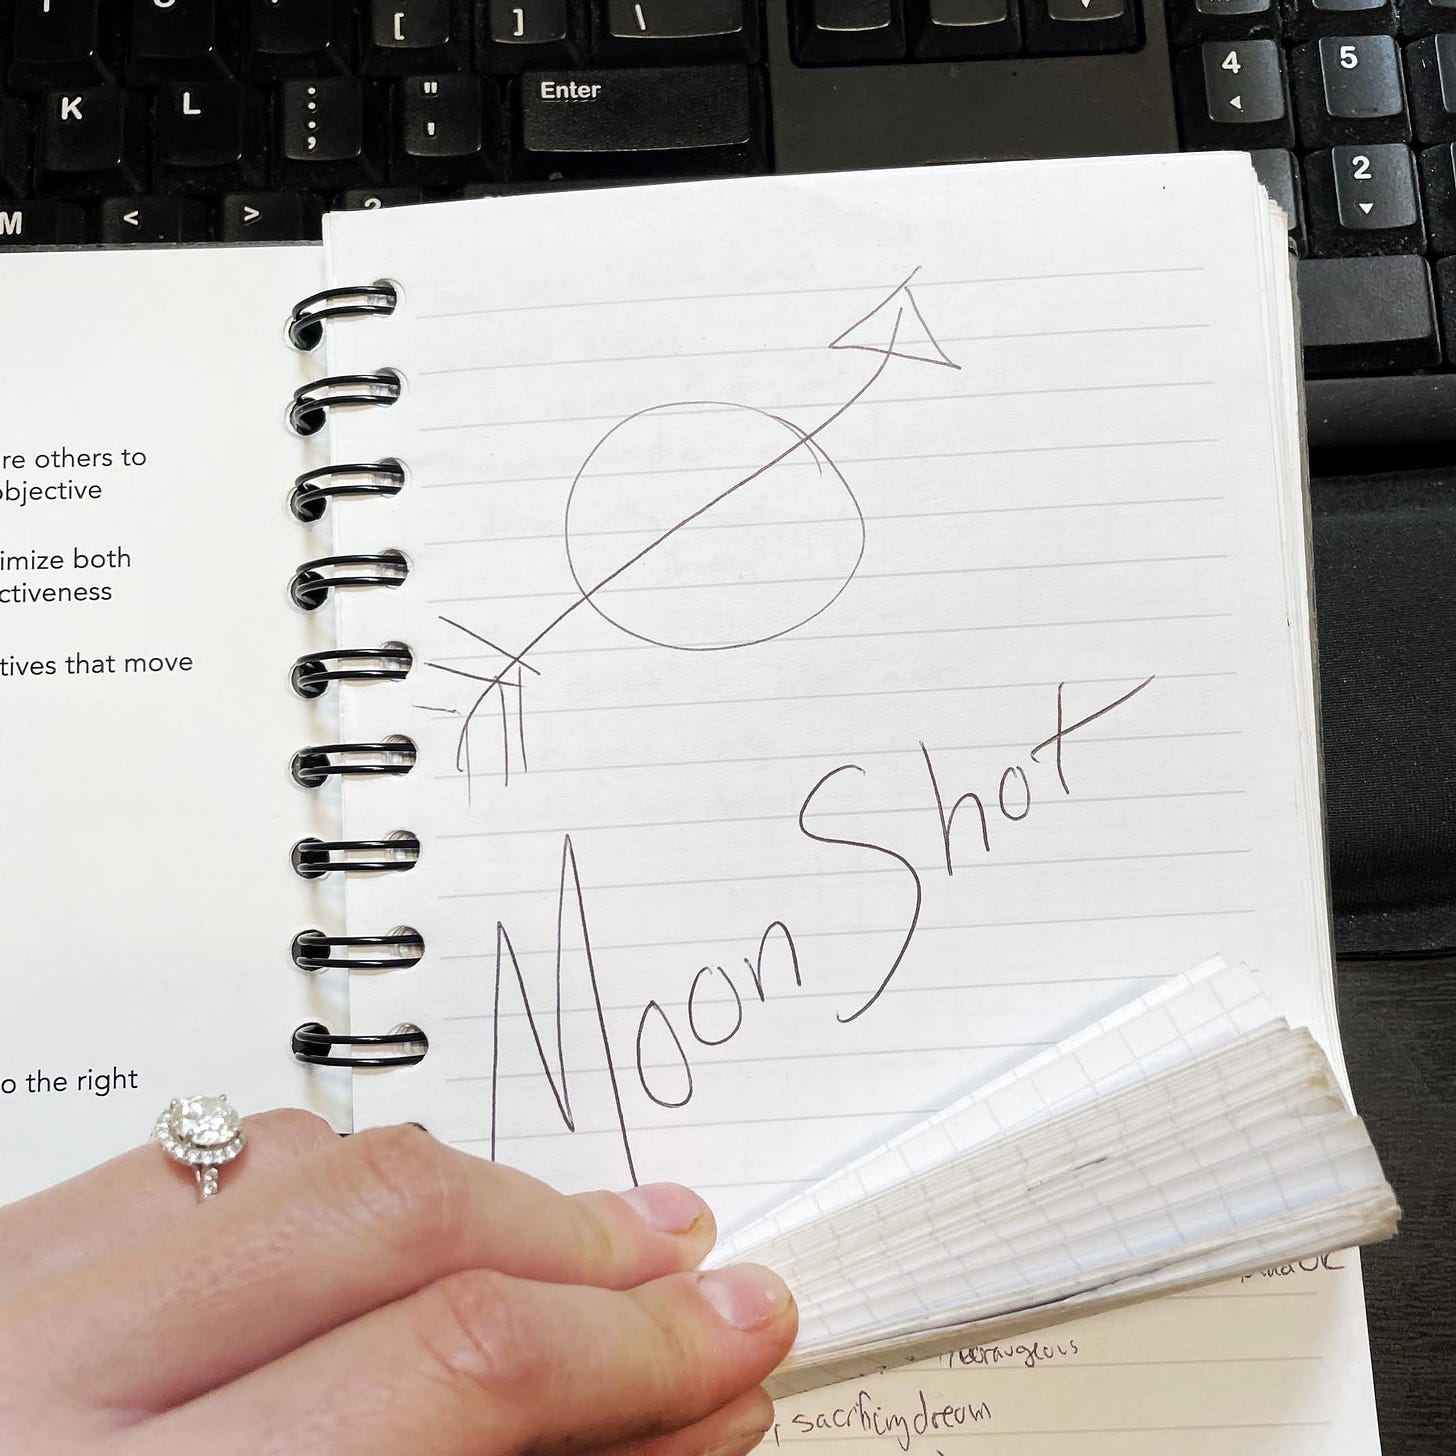 a journal on a black desk opened to a page with Moonshot written across it in large lettering